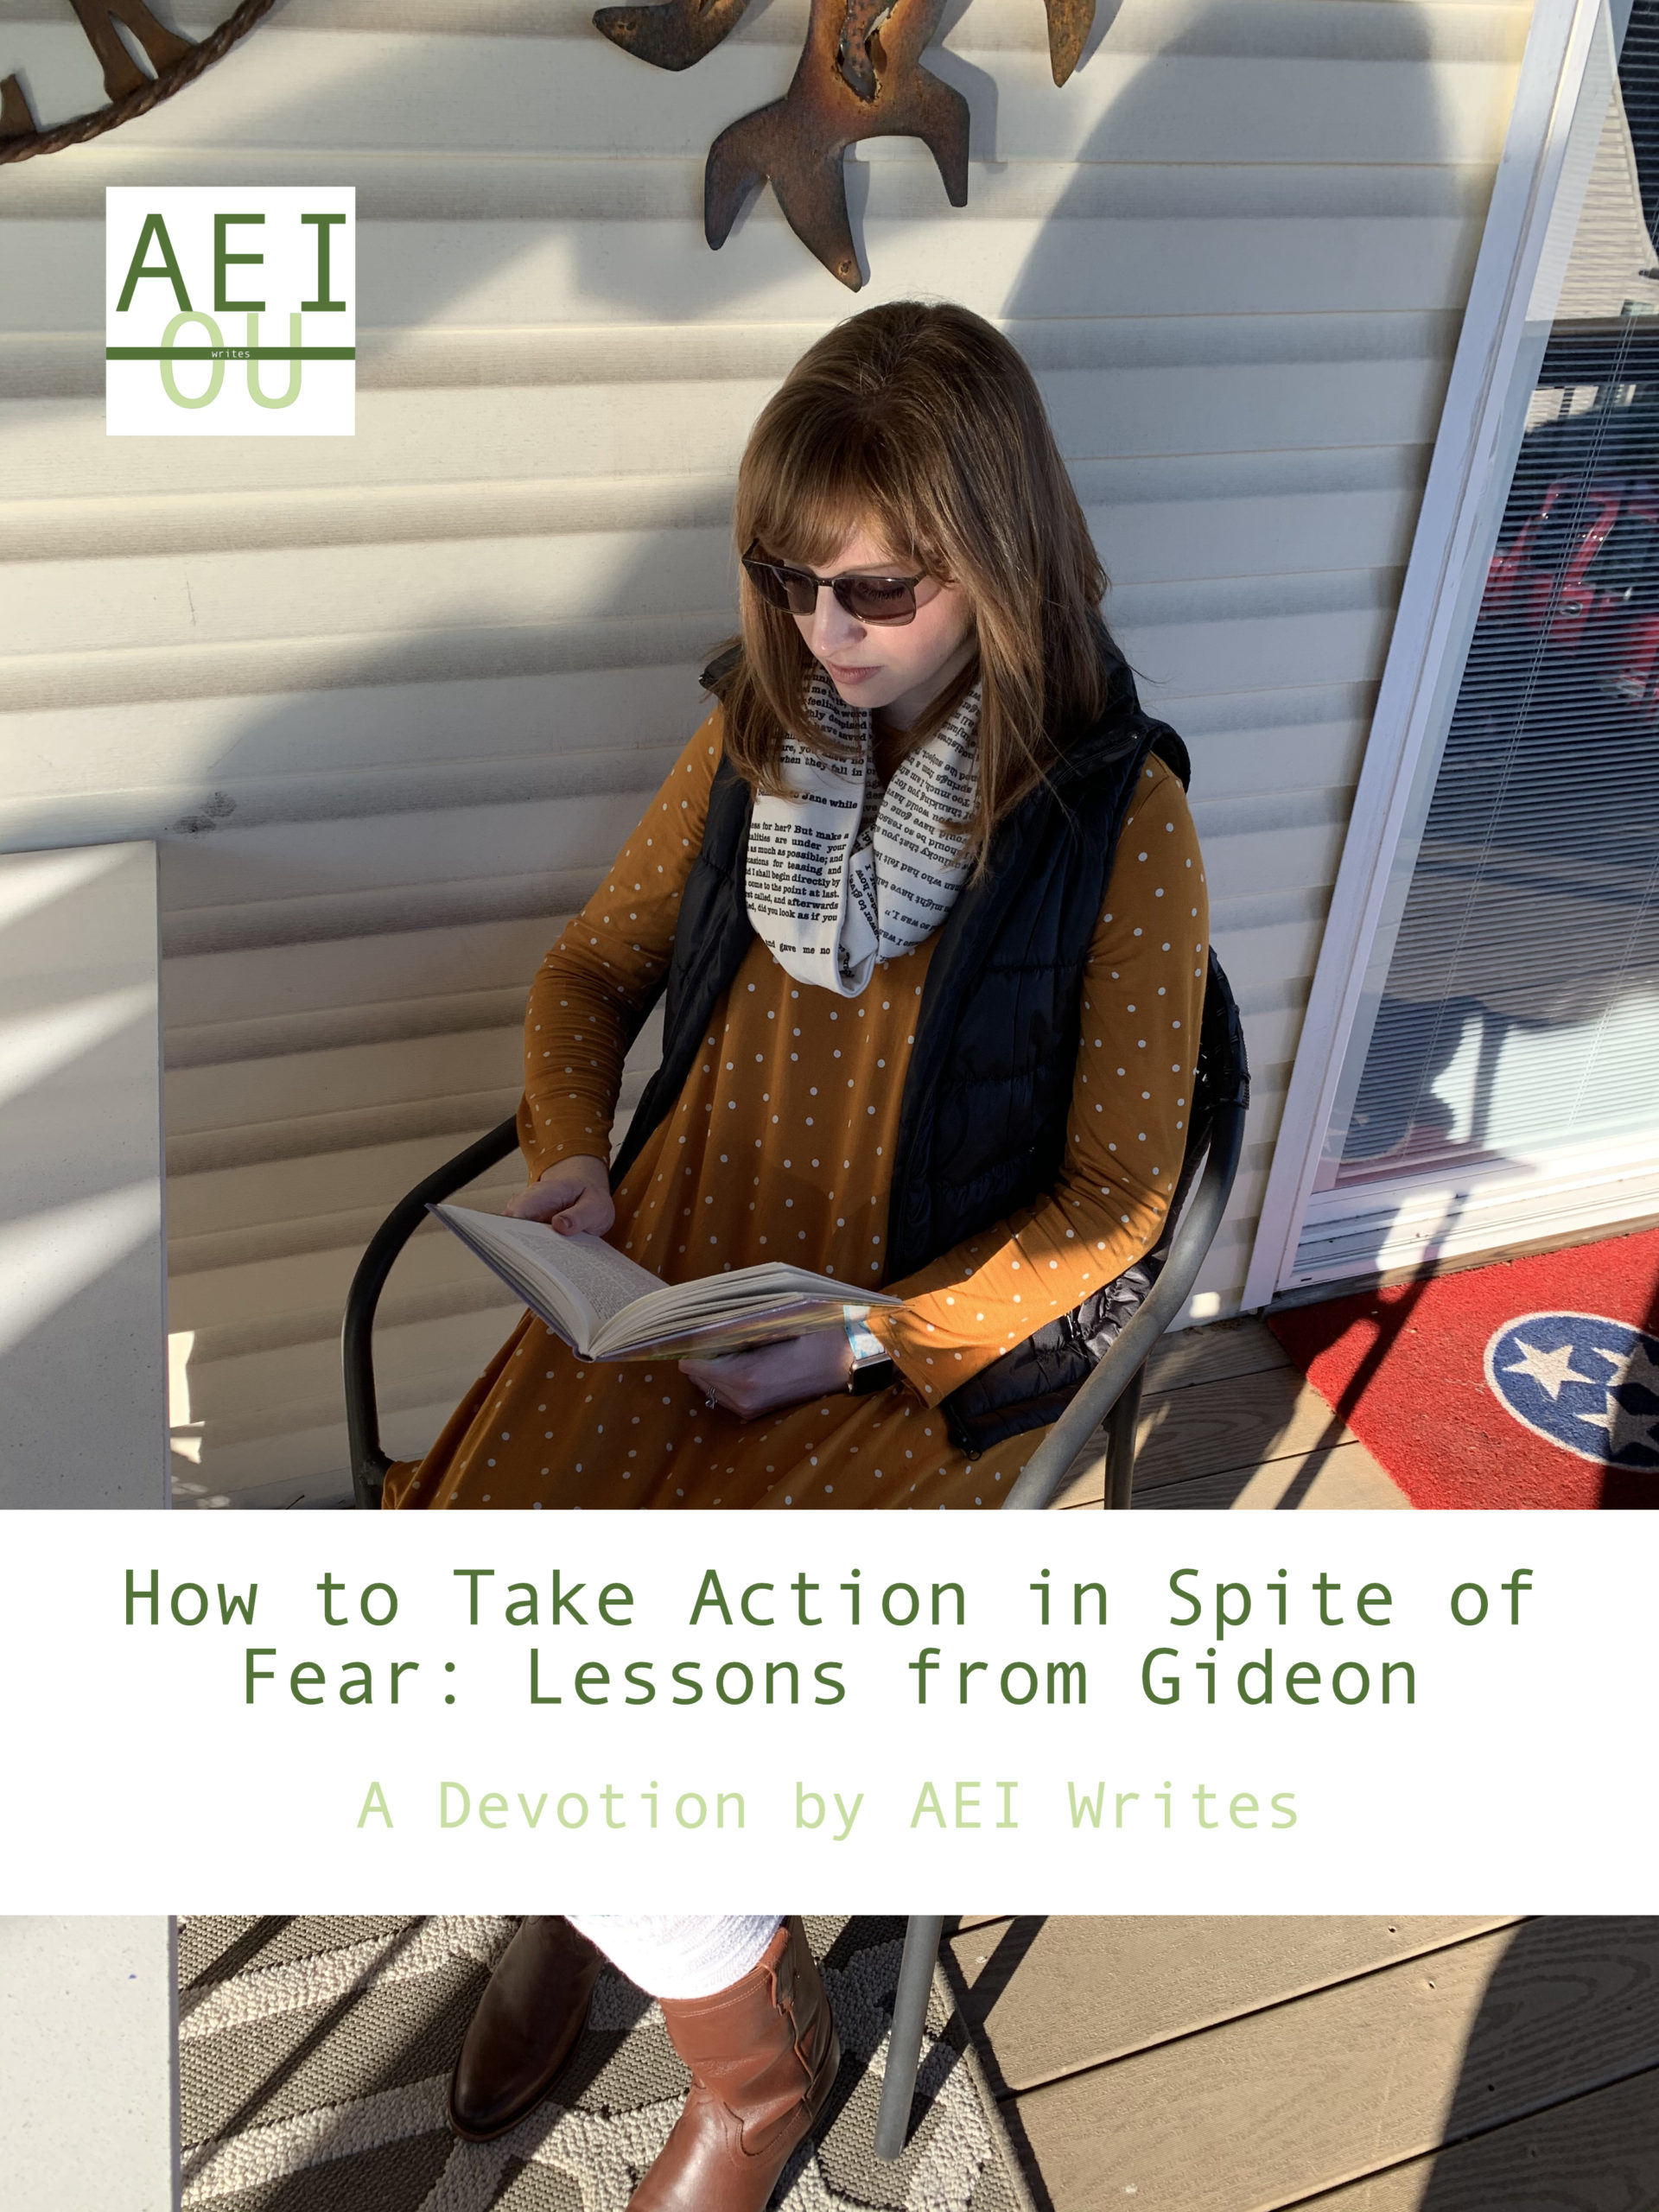 How to Take Action in Spite of Fear: Lessons from Gideon